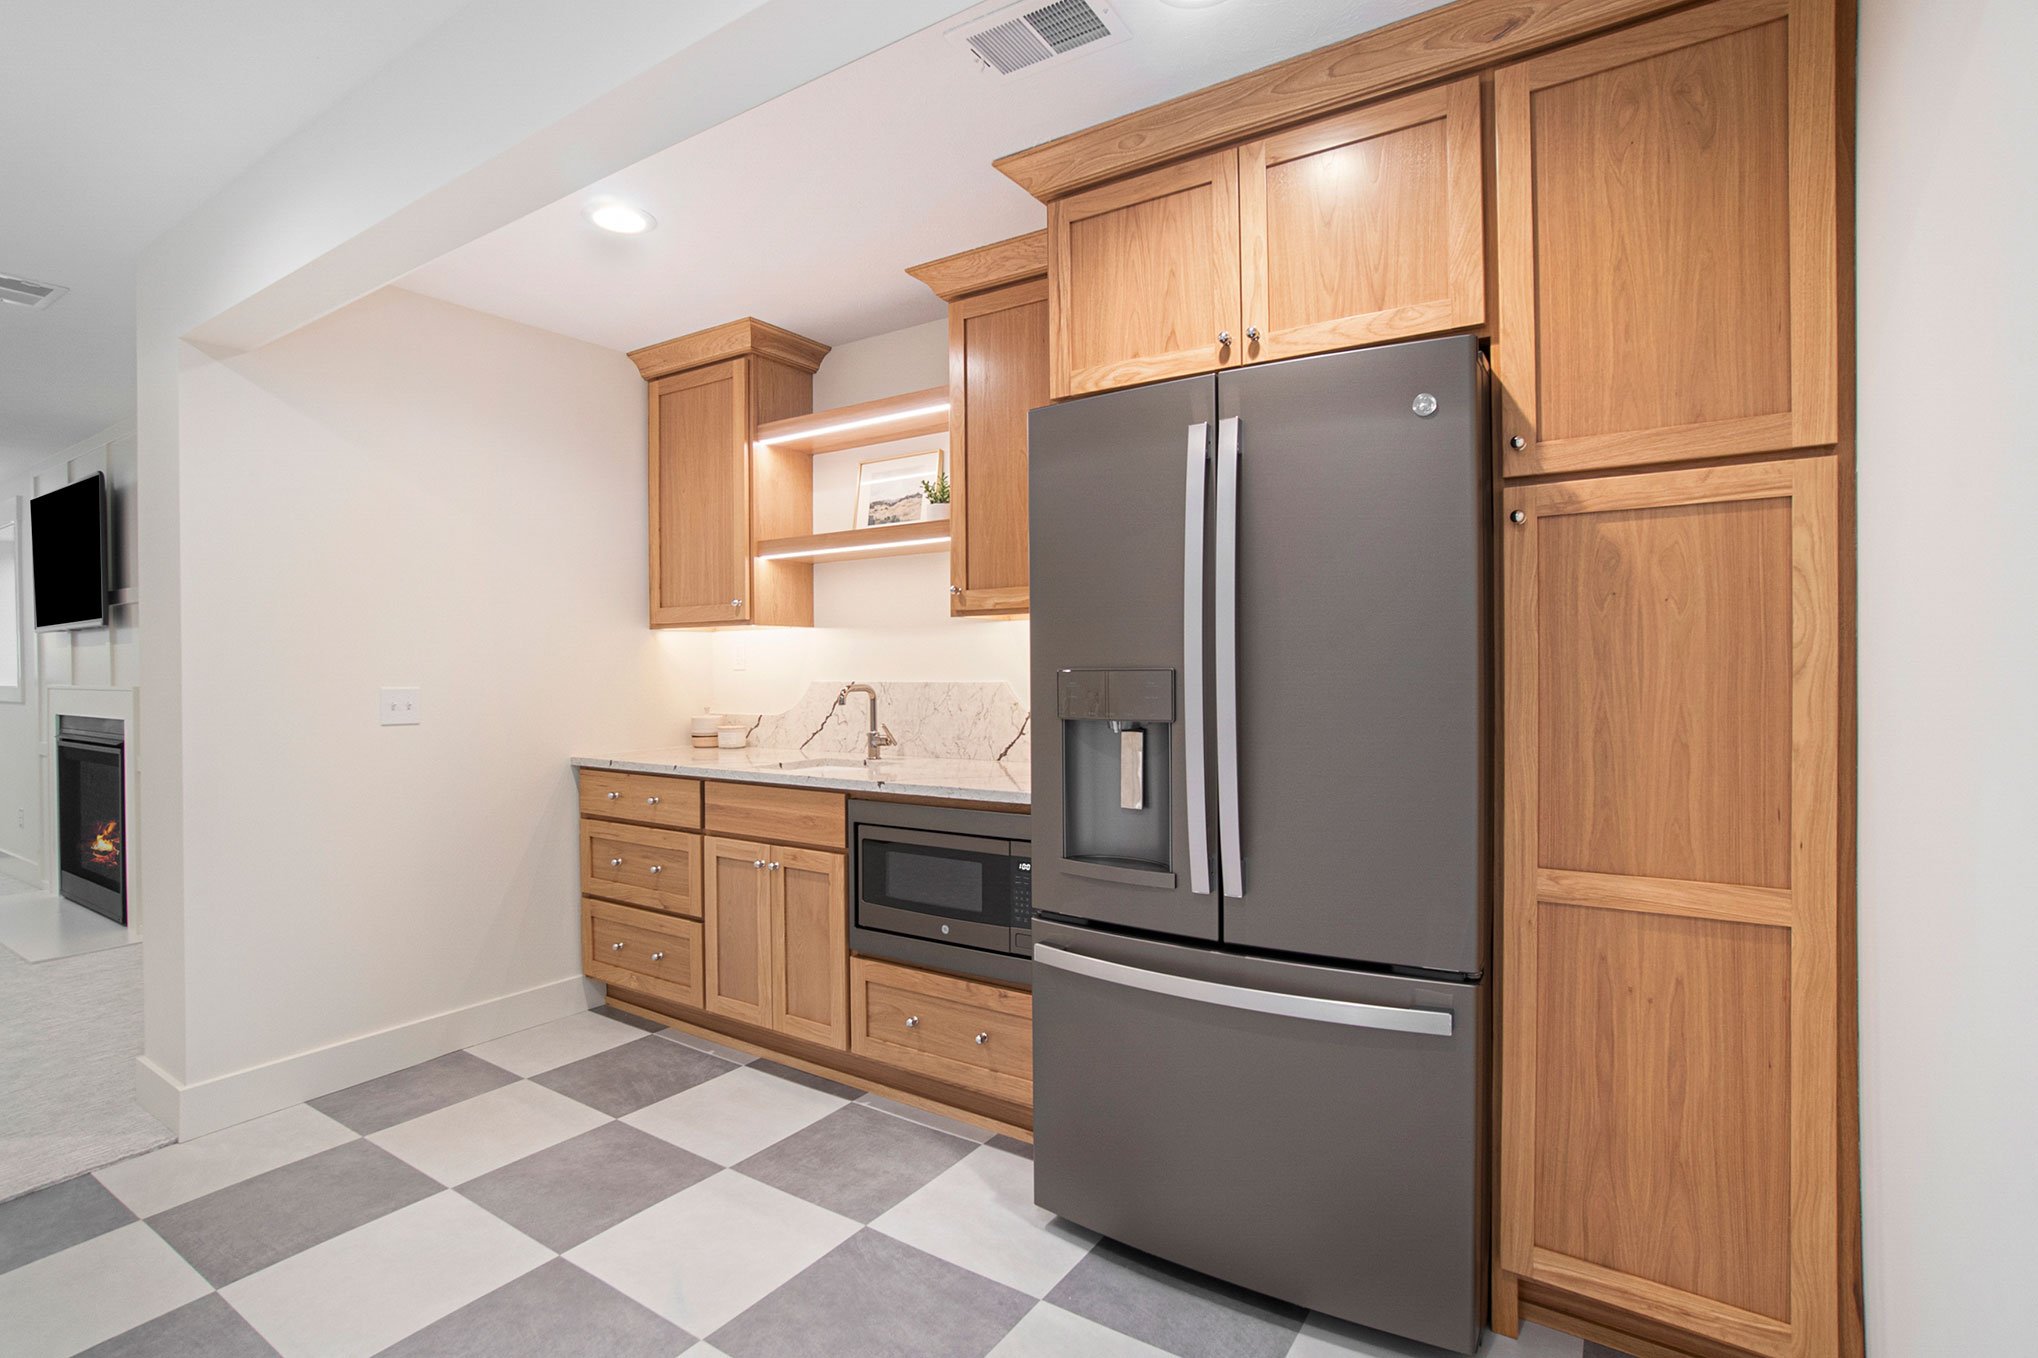 kitchenette. custom cabinetry. stained cabientry. checkered flooring. trendy floor.jpg